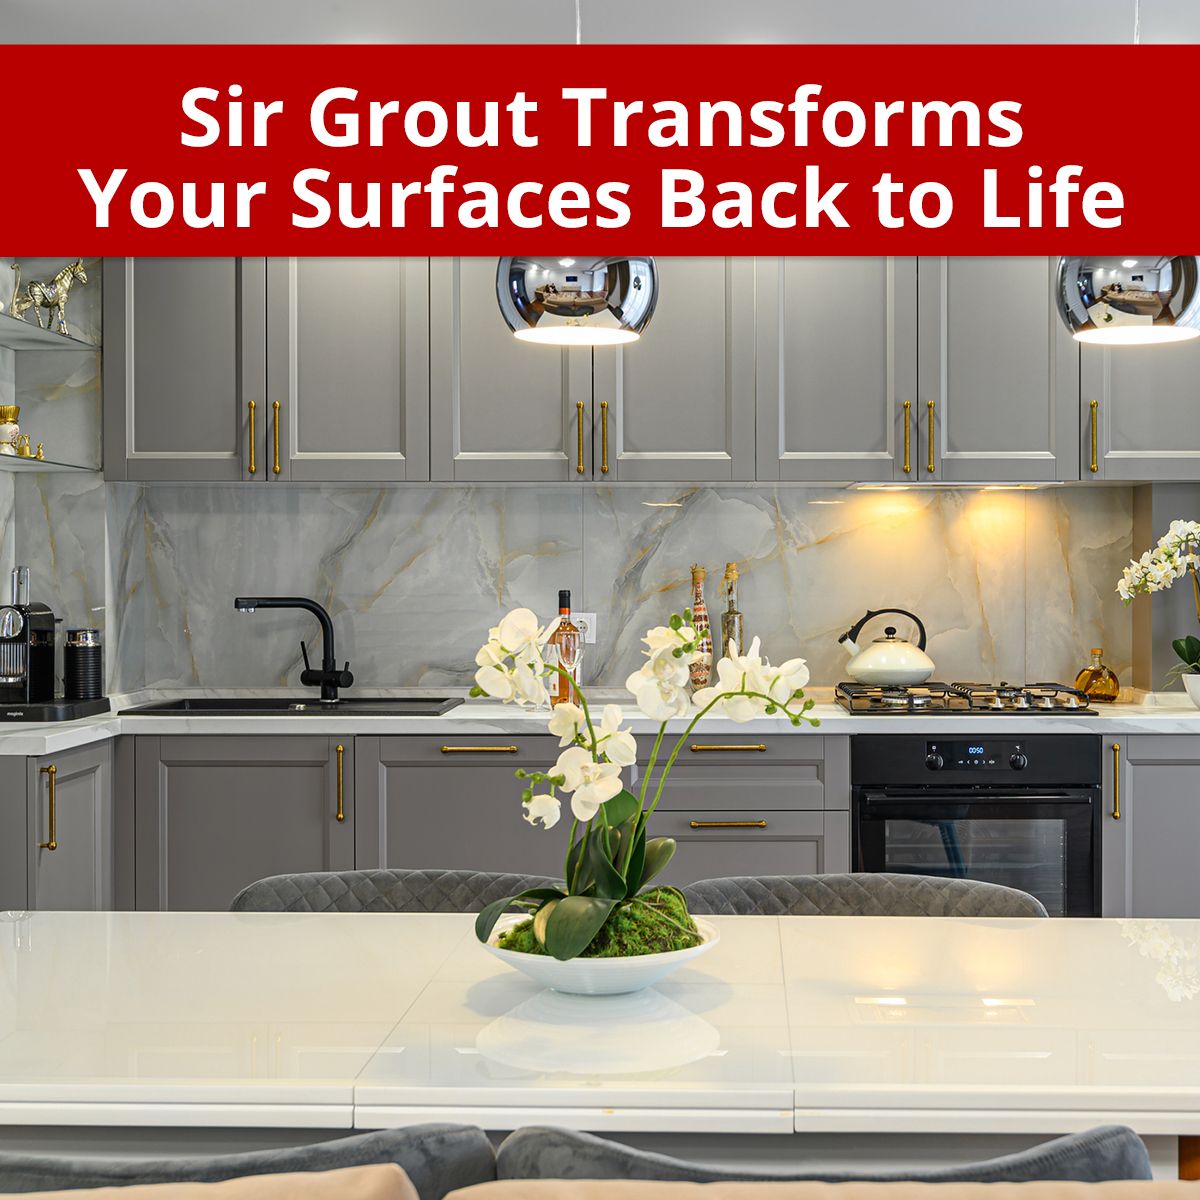 Sir Grout Transforms Your Surfaces Back to Life